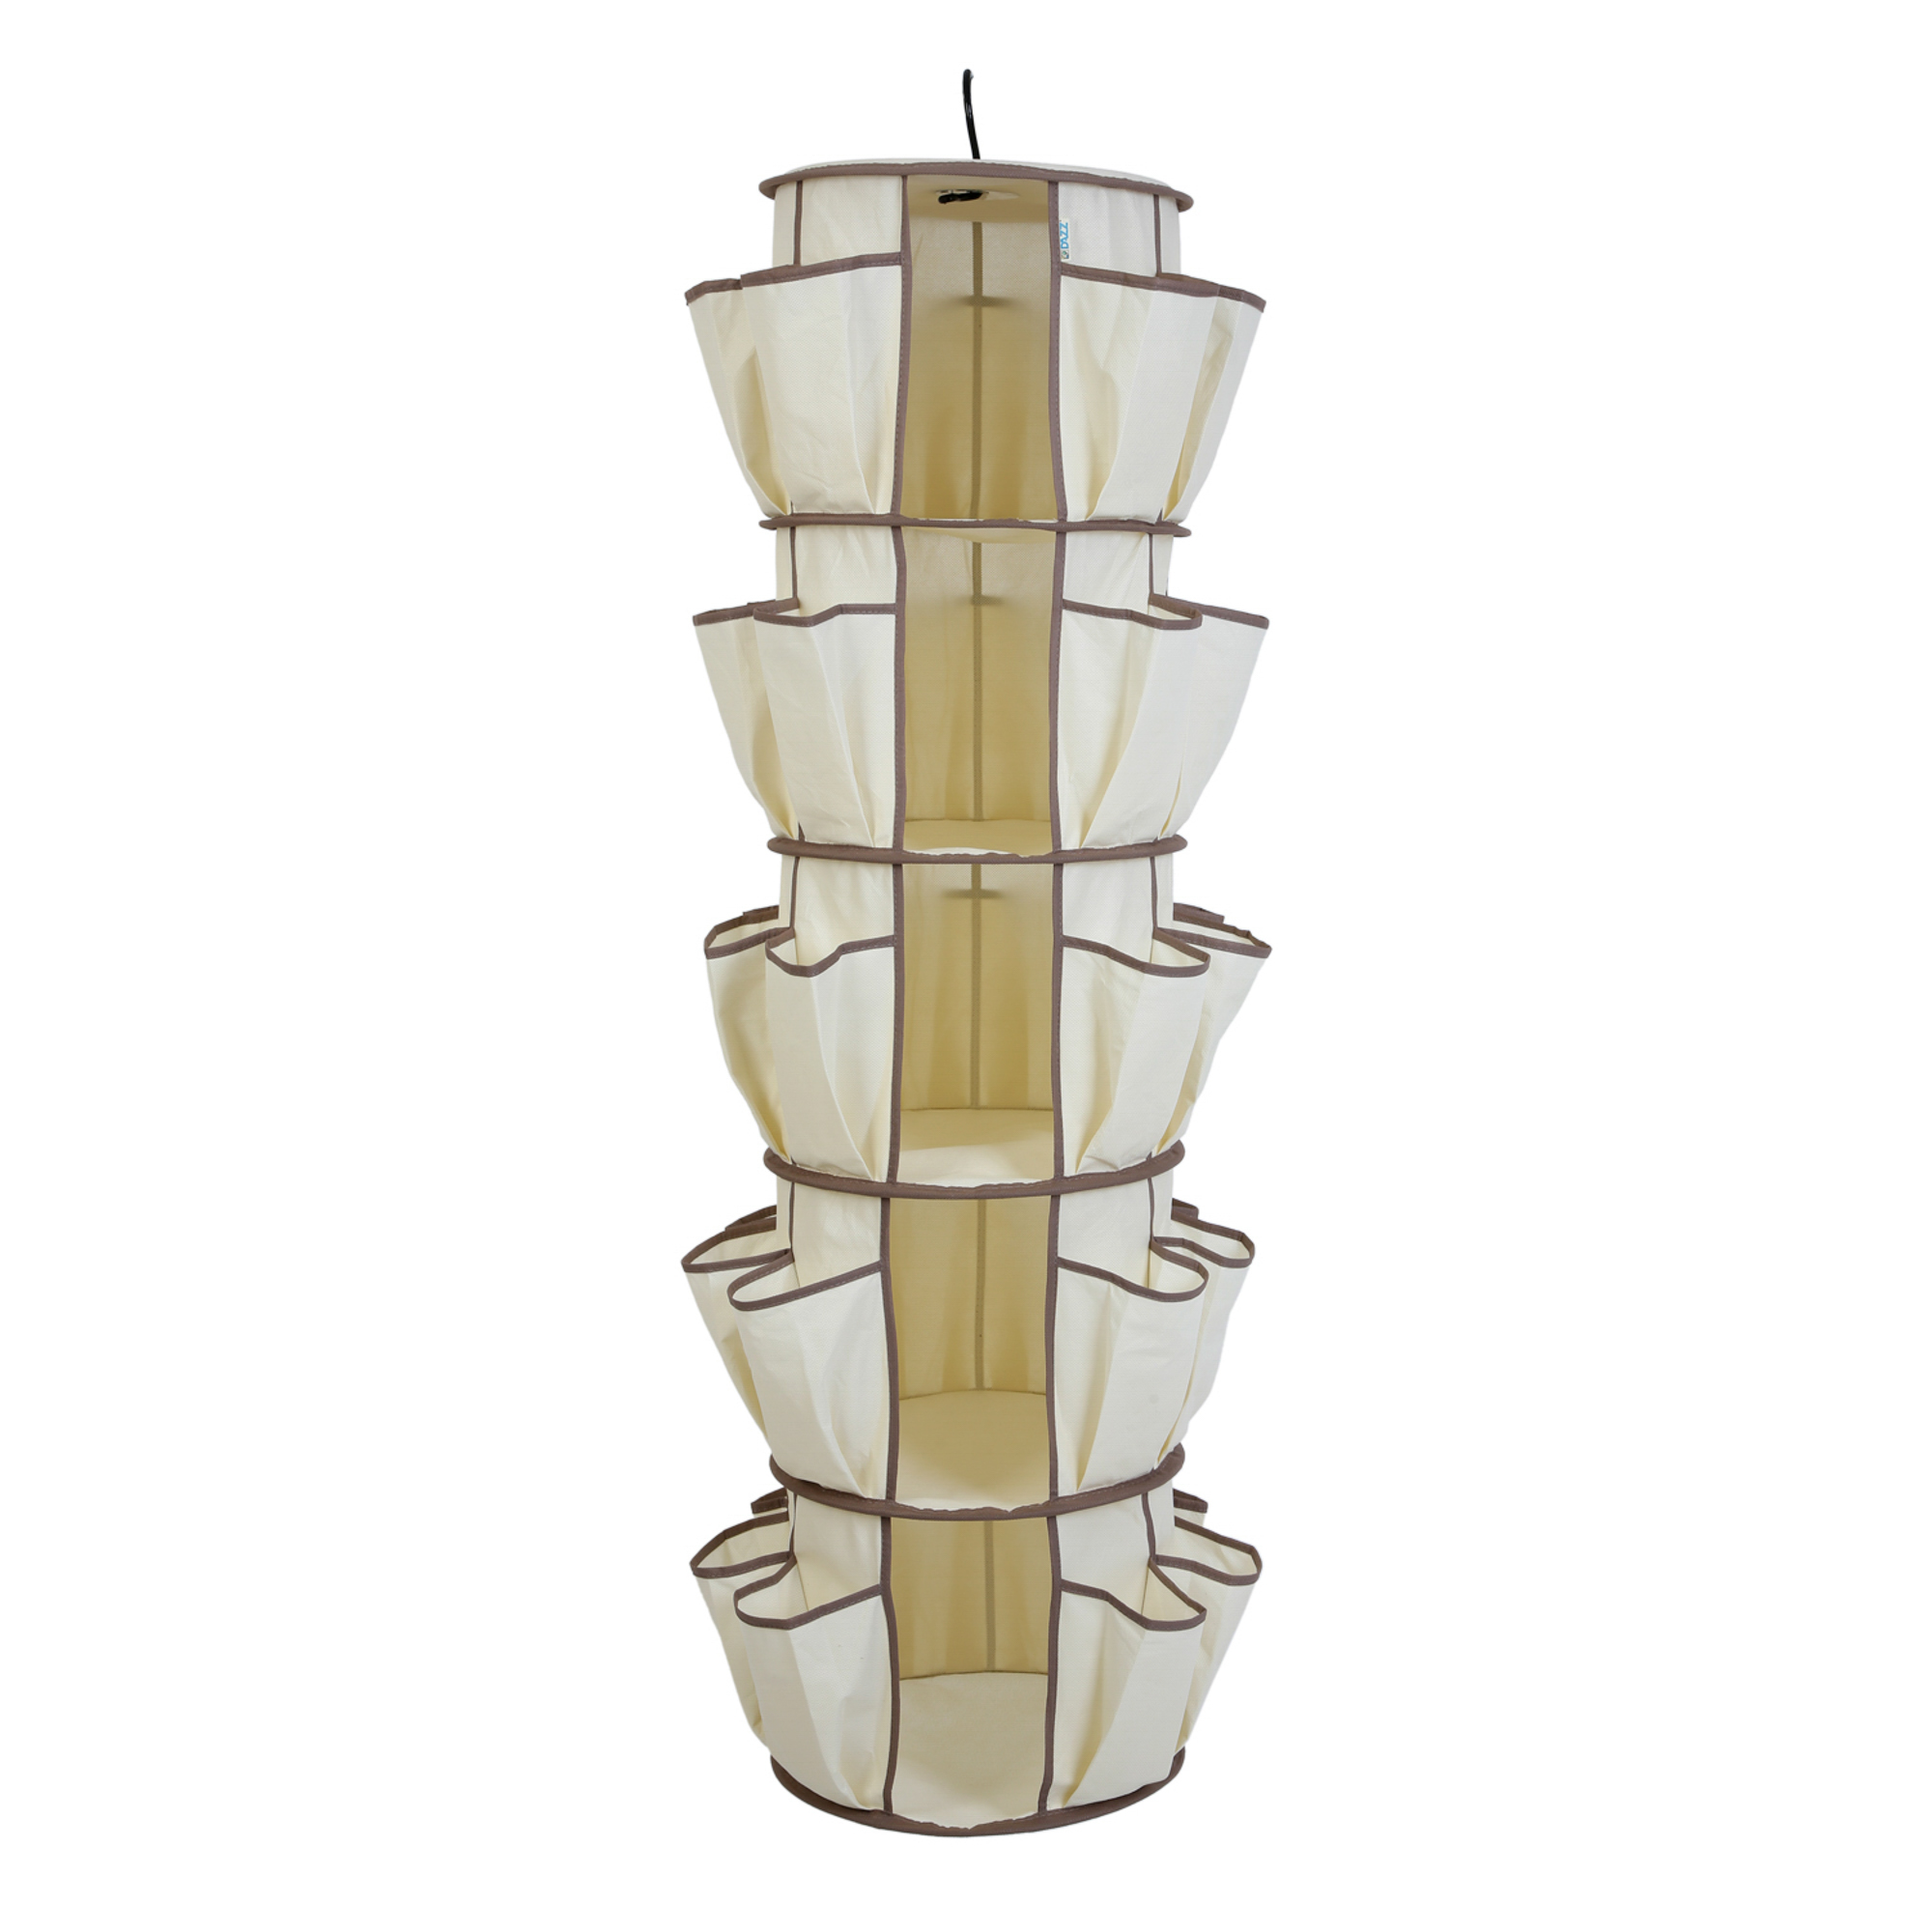 Smart Design 5-Tier Hanging Carousel Organizer with 40 Pockets and Steel Metal Hook - 13 x 51.8 inch - Beige - image 3 of 5